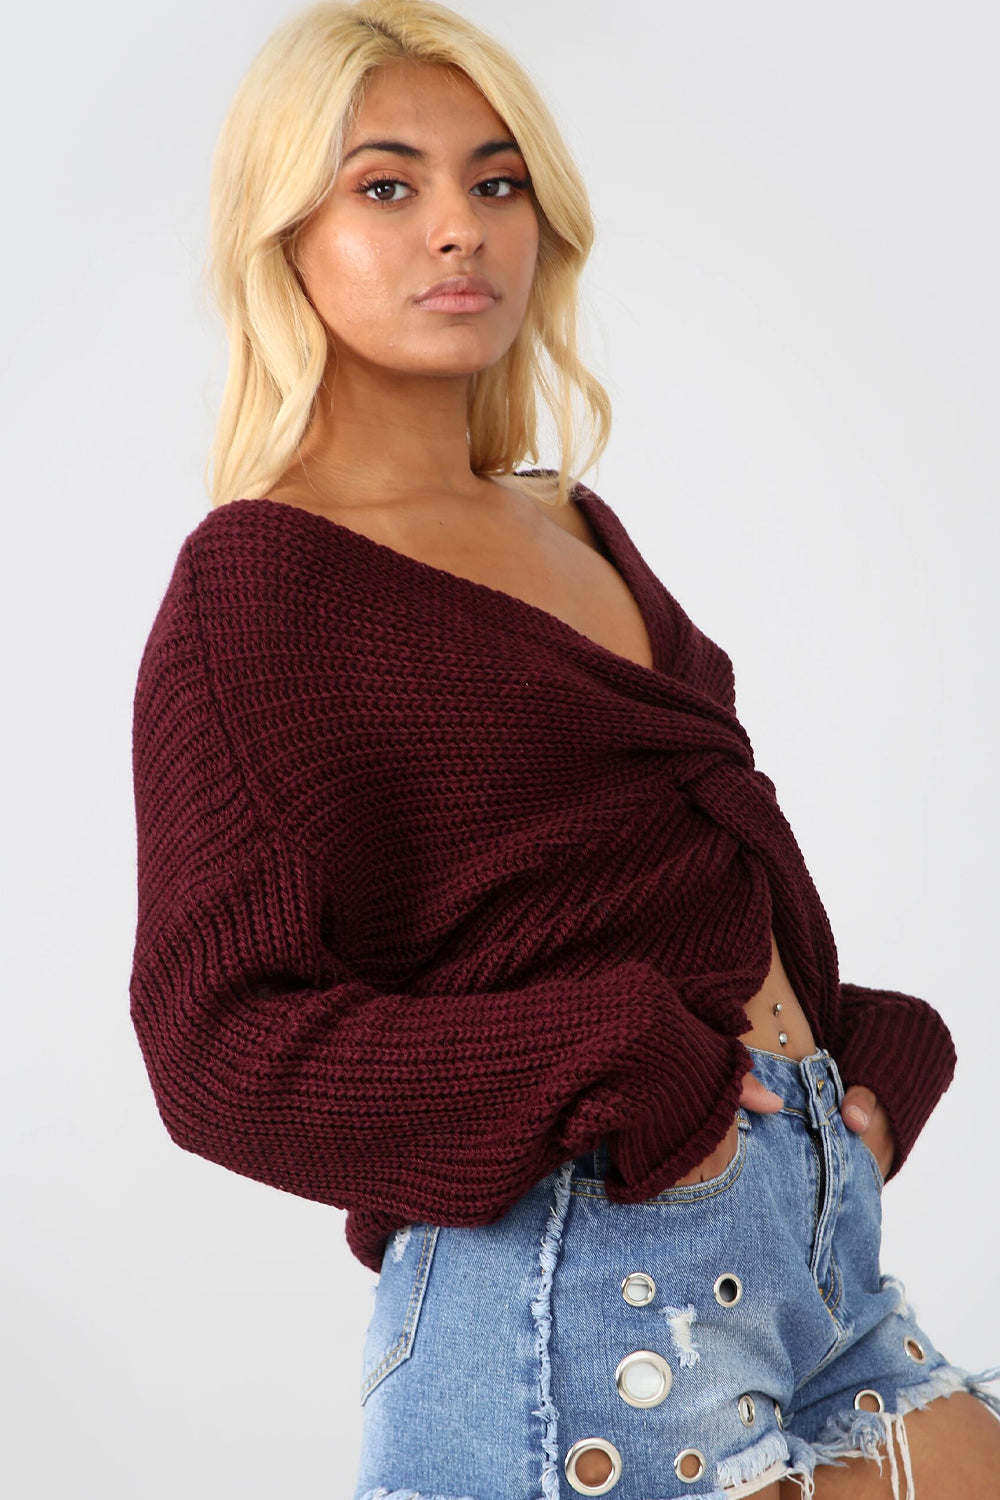 Twisted Front Black Chunky Knit Jumper - bejealous-com